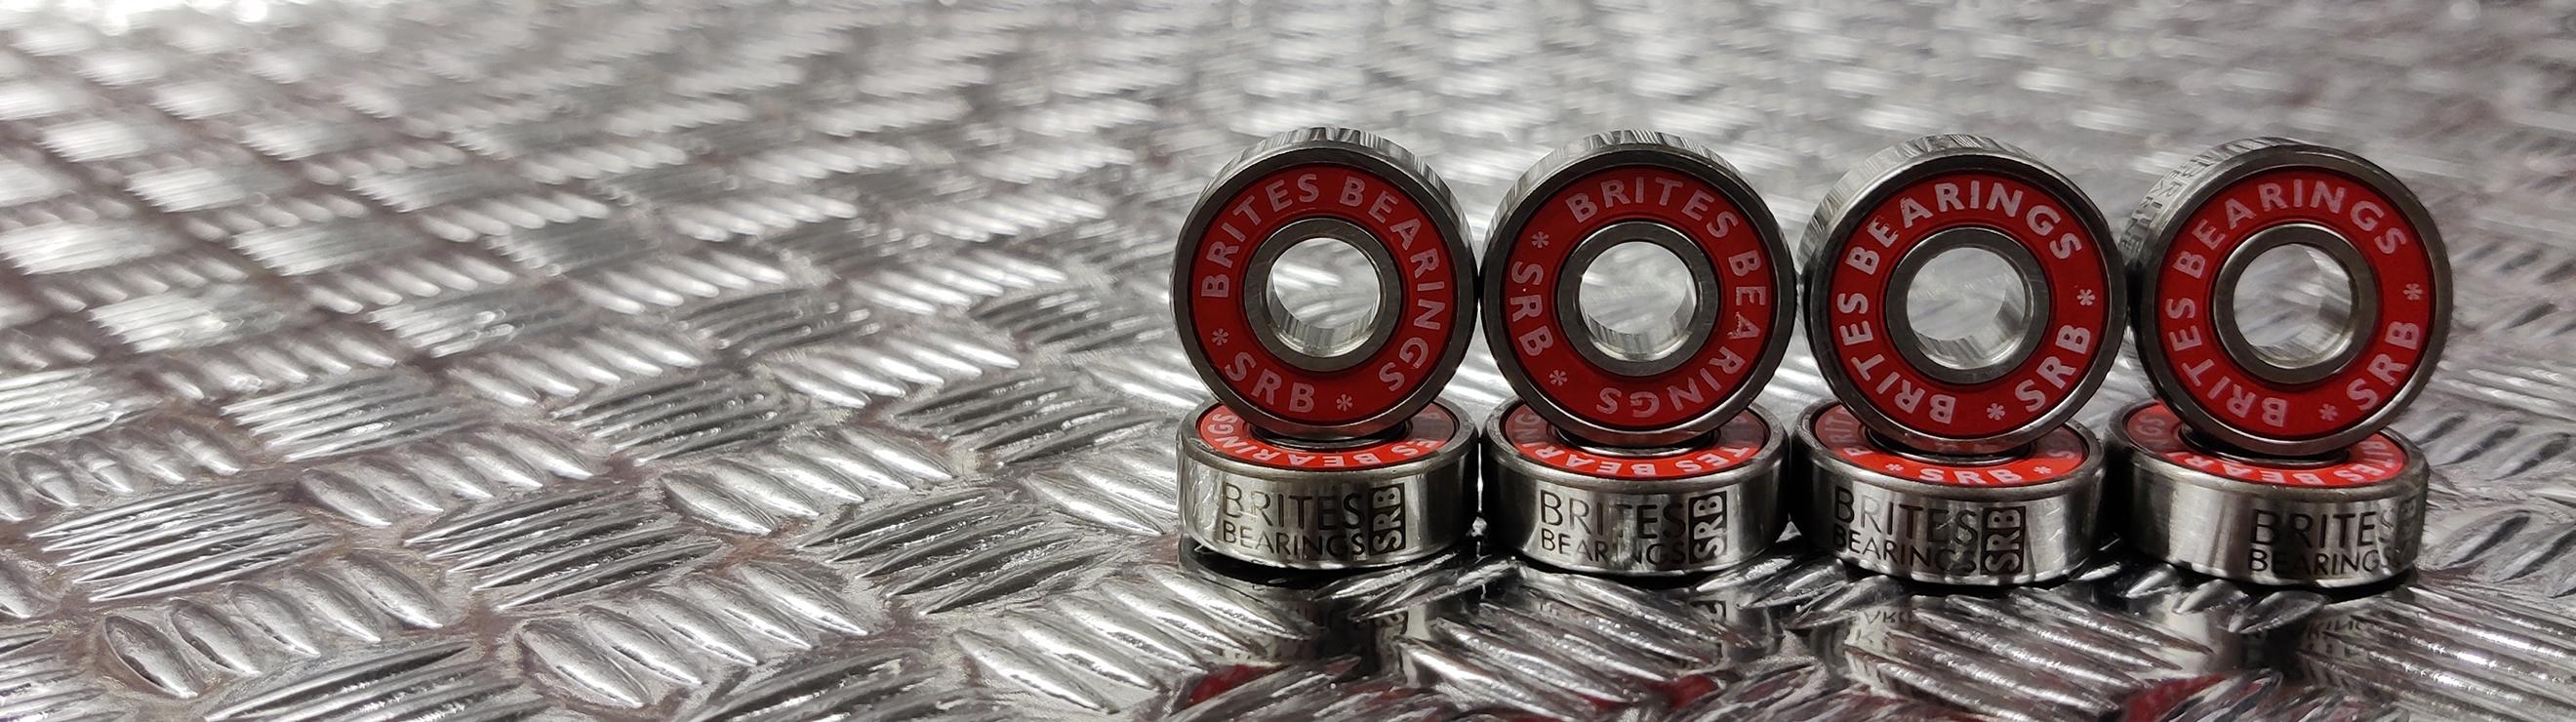 <h2 style="text-align: center;"><strong>Brites Original Skate Rated Bearings</strong></h2><p style="text-align: center;">Available for Trade Purchases</p>